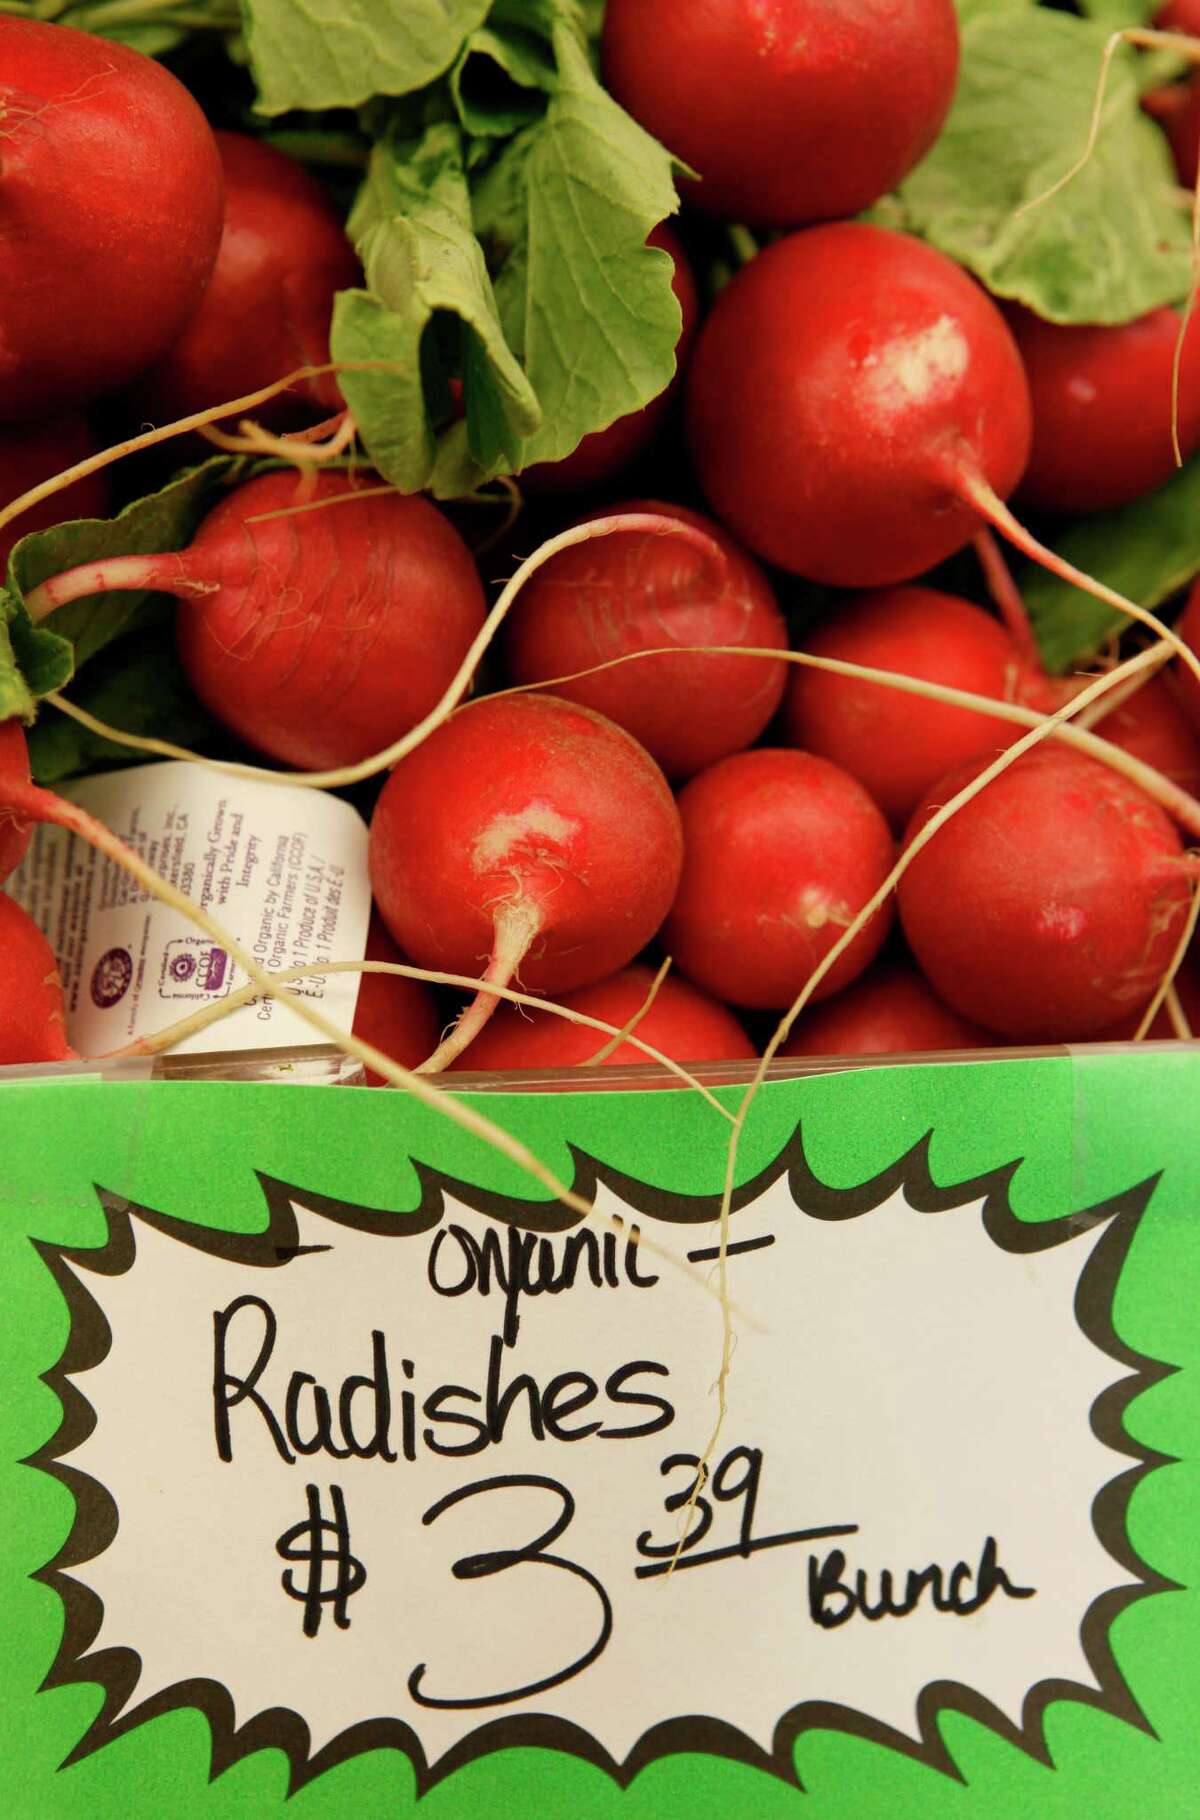 FILE - This March 16, 2011, file photo shows organic radishes at the Pacifica Farmers Market in Pacifica, Calif. Patient after patient asked: Is eating organic food, which costs more, really better for me? Unsure, Stanford University doctors dug through reams of research to find out _ and concluded there's little evidence that going organic is much healthier, citing only a few differences involving pesticides and antibiotics. Eating organic fruits and vegetables can lower exposure to pesticides, including for children _ but the amount measured from conventionally grown produce was within safety limits, the researchers reported Monday, Sept. 3, 2012. (AP Photo, File)